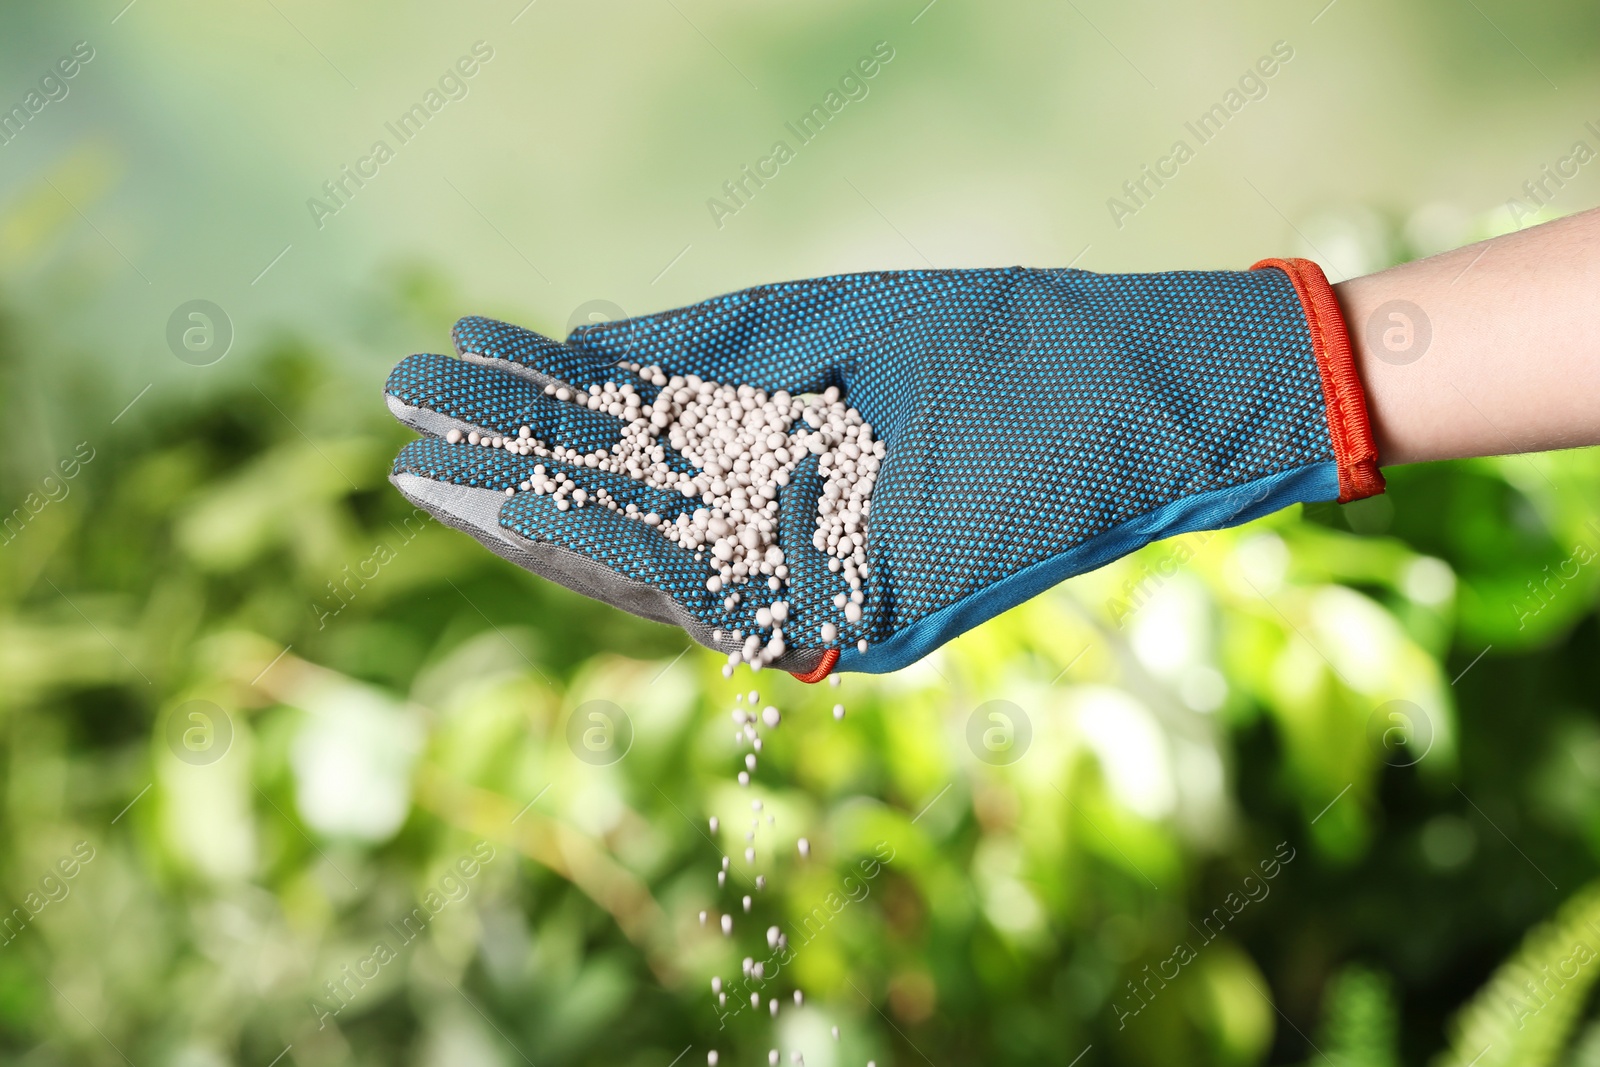 Photo of Woman in glove pouring fertilizer on blurred background, closeup. Gardening time